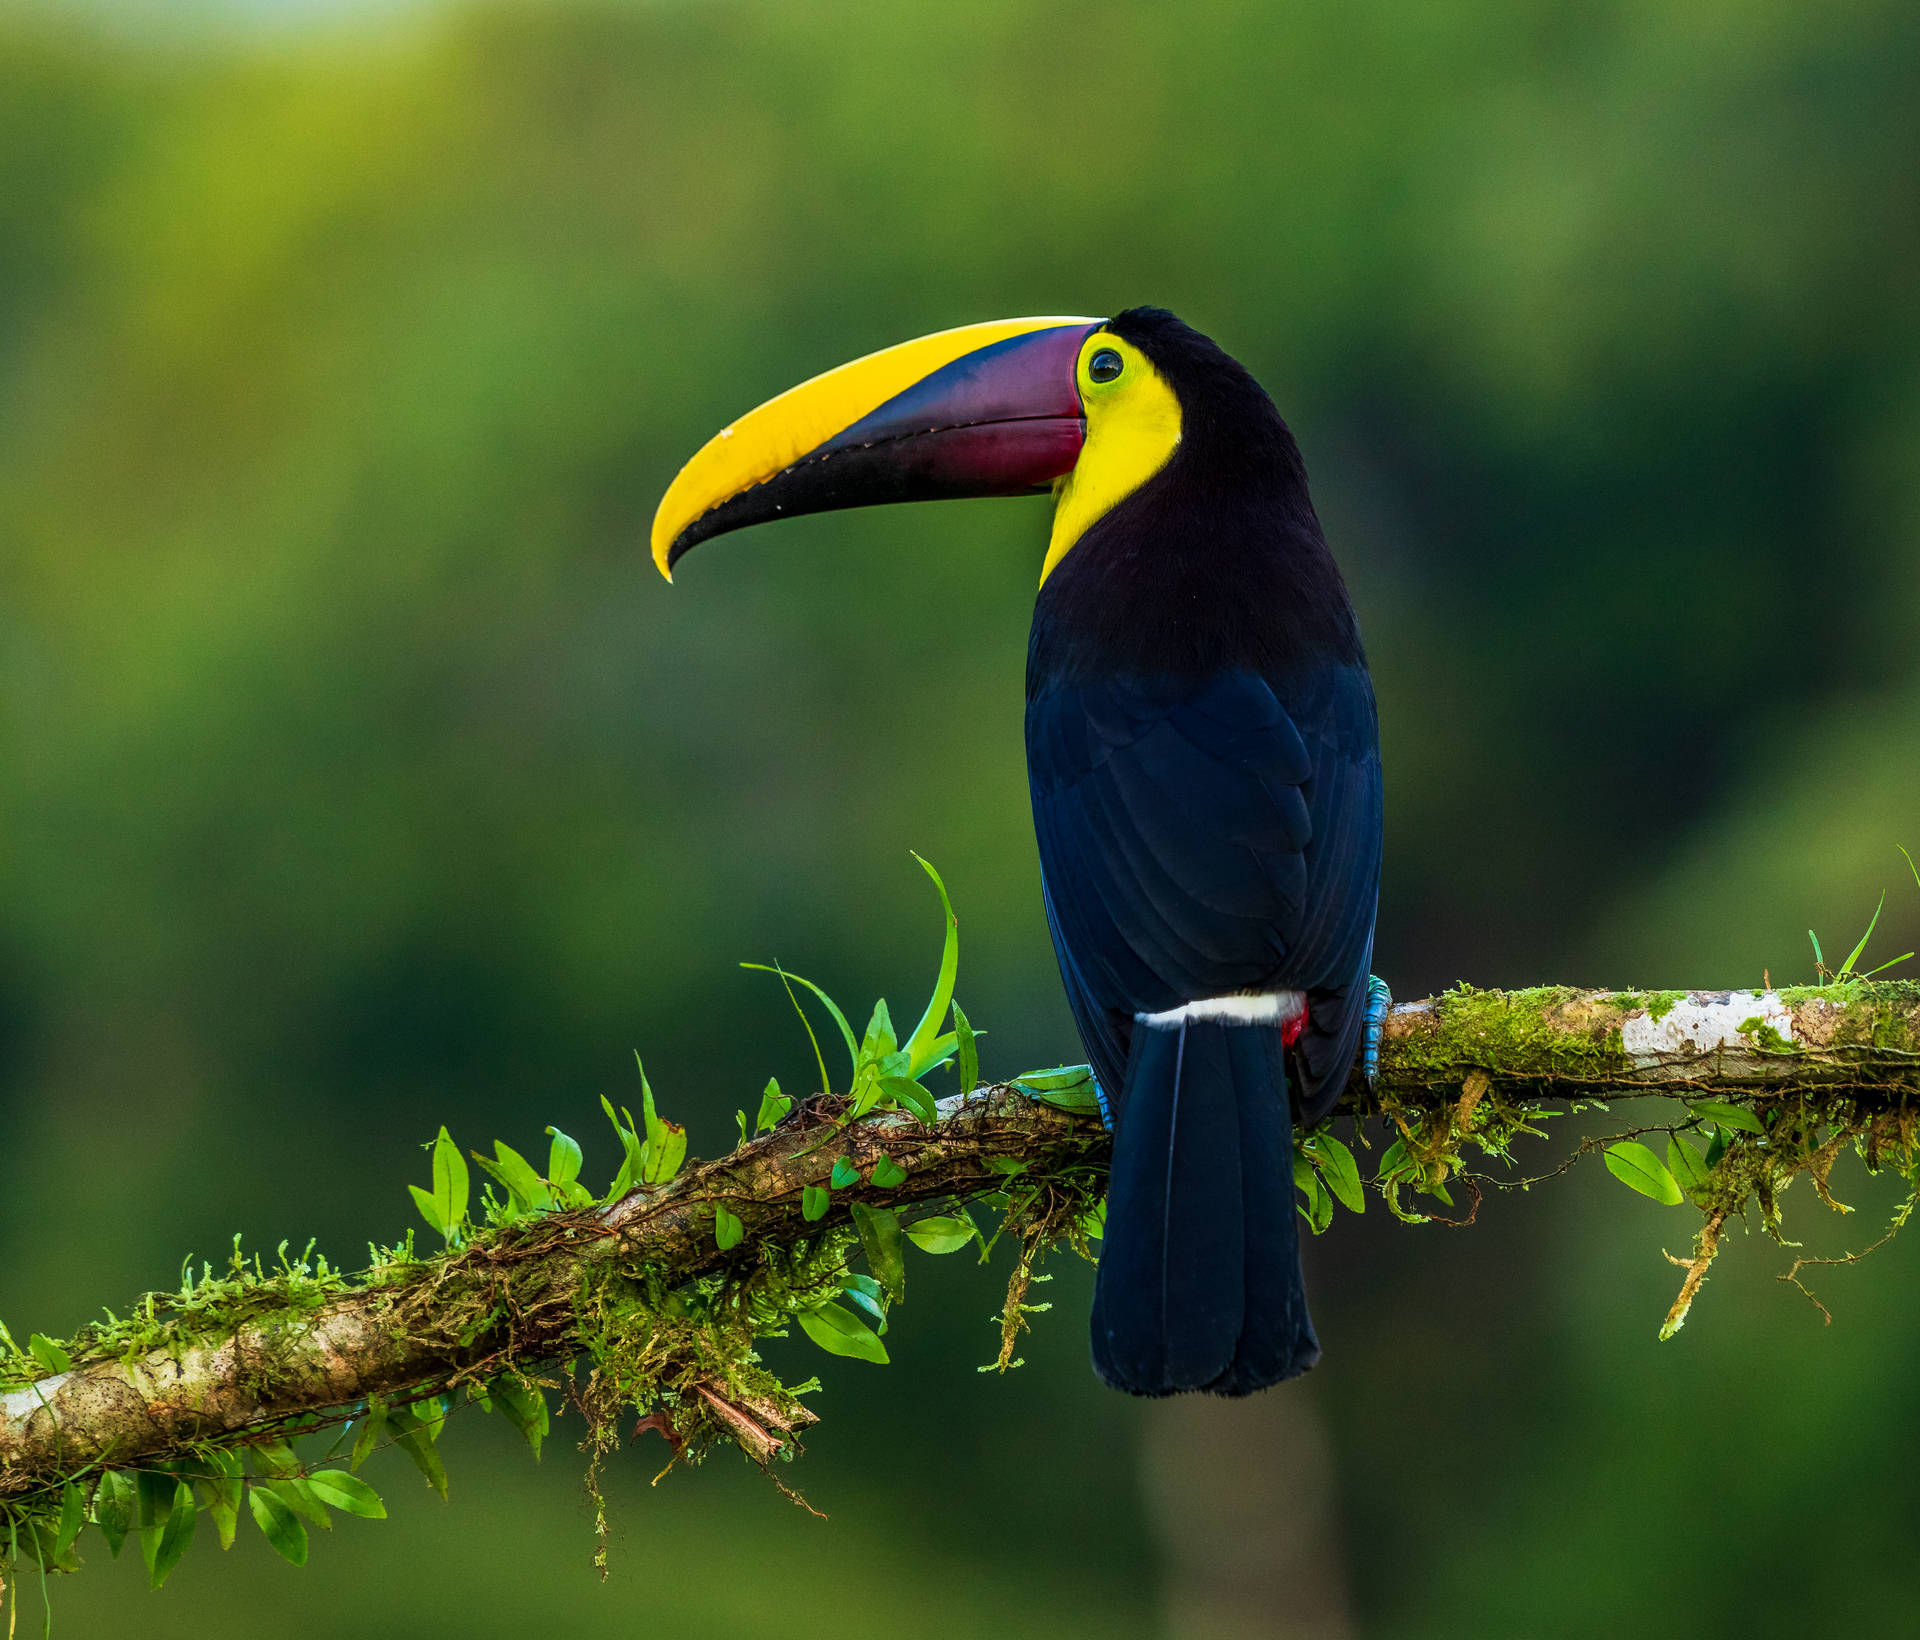 A Black Toucan In Nature Wallpaper